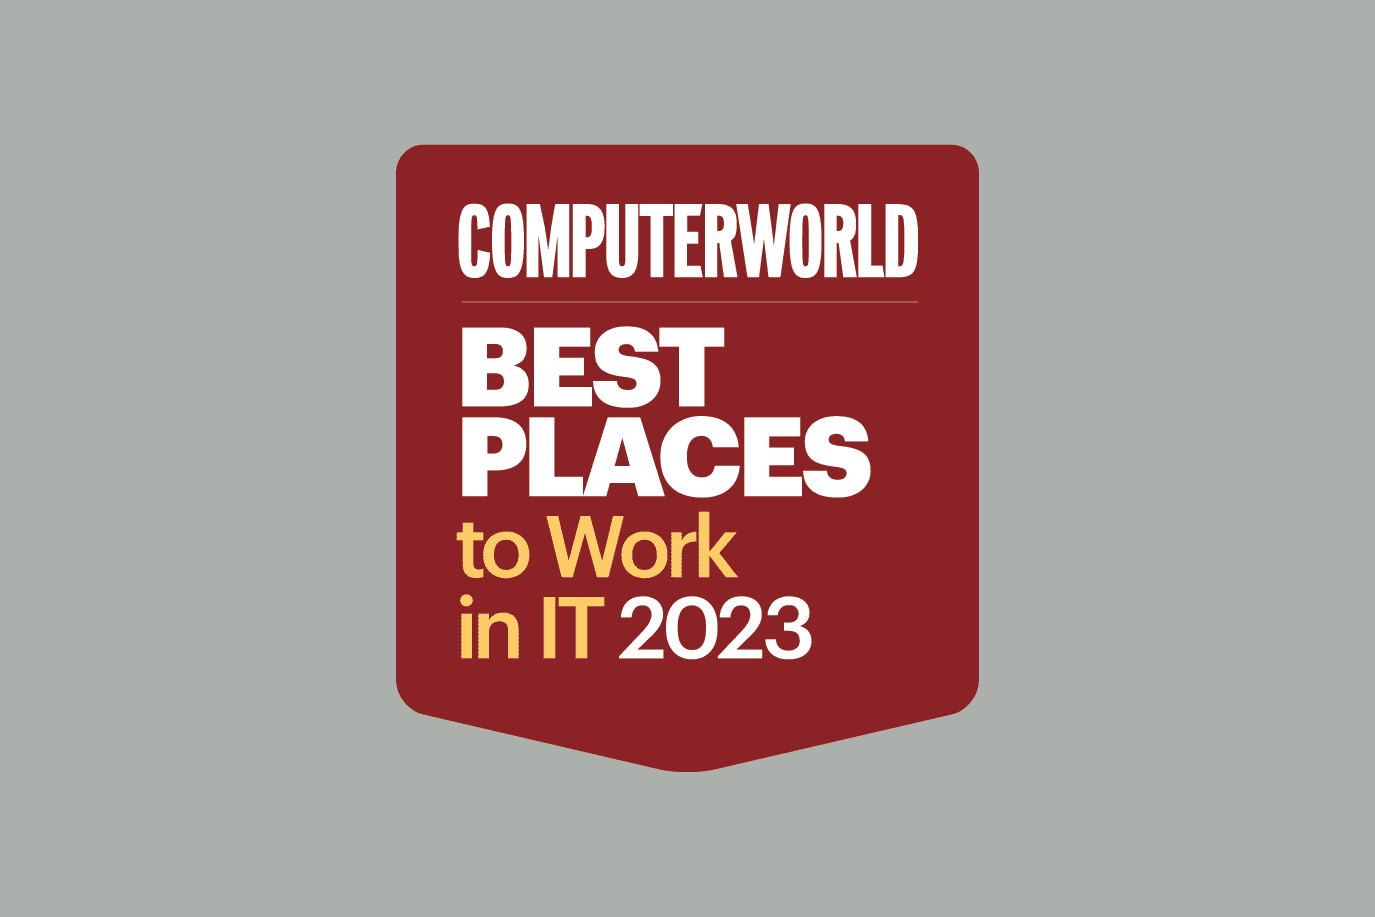 Red Computerworld Best Places to Work in IT 2023 award logo on grey background